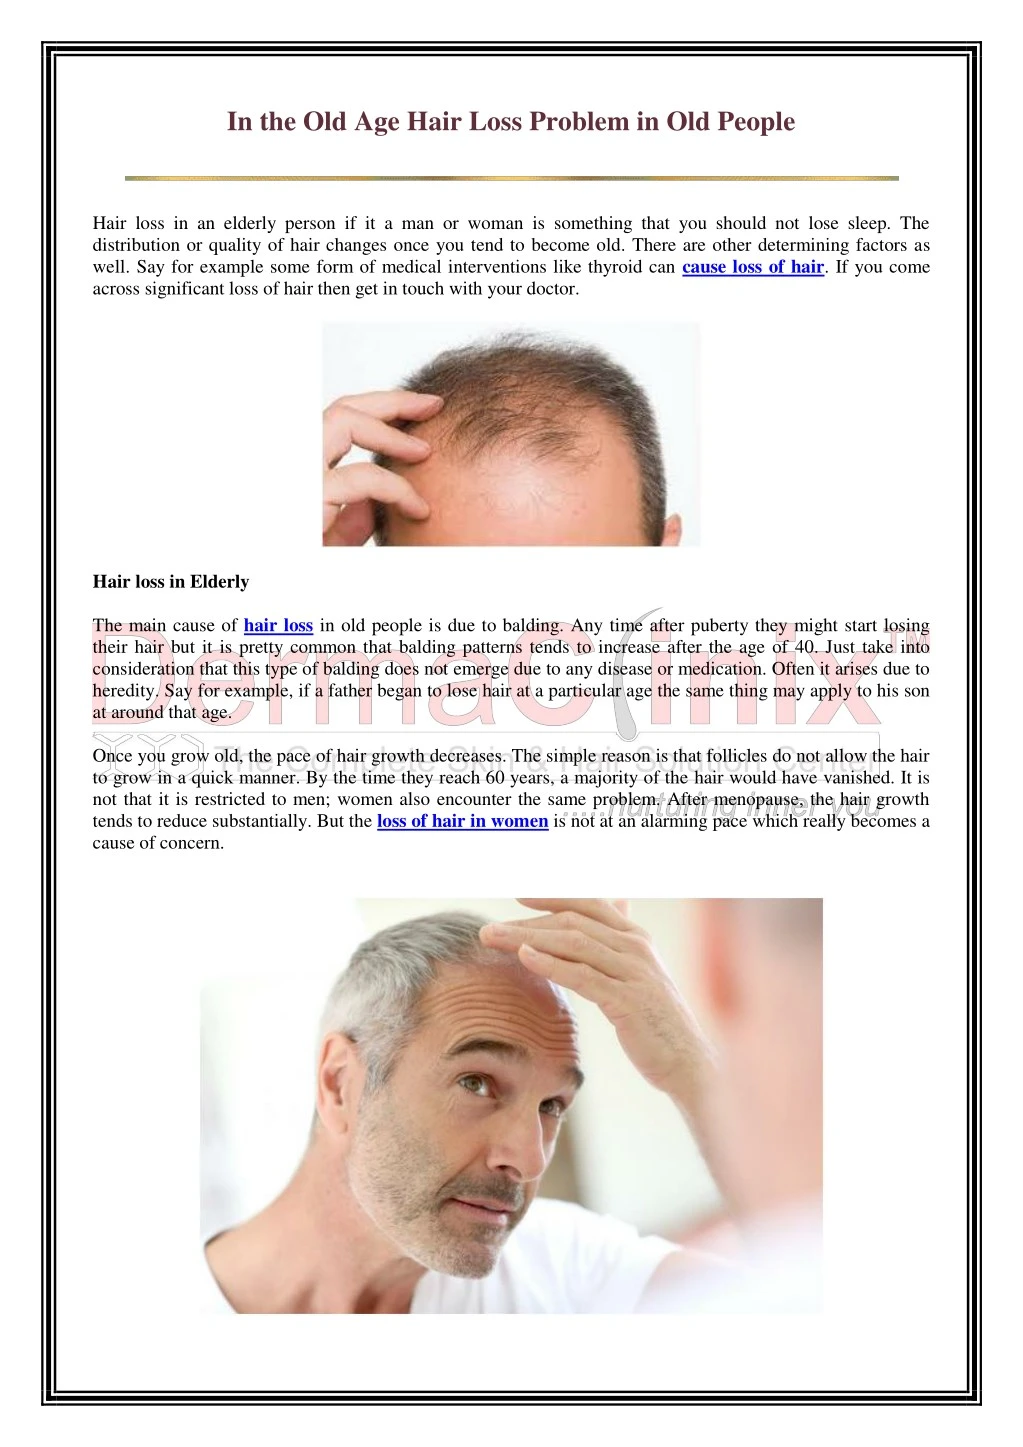 in the old age hair loss problem in old people